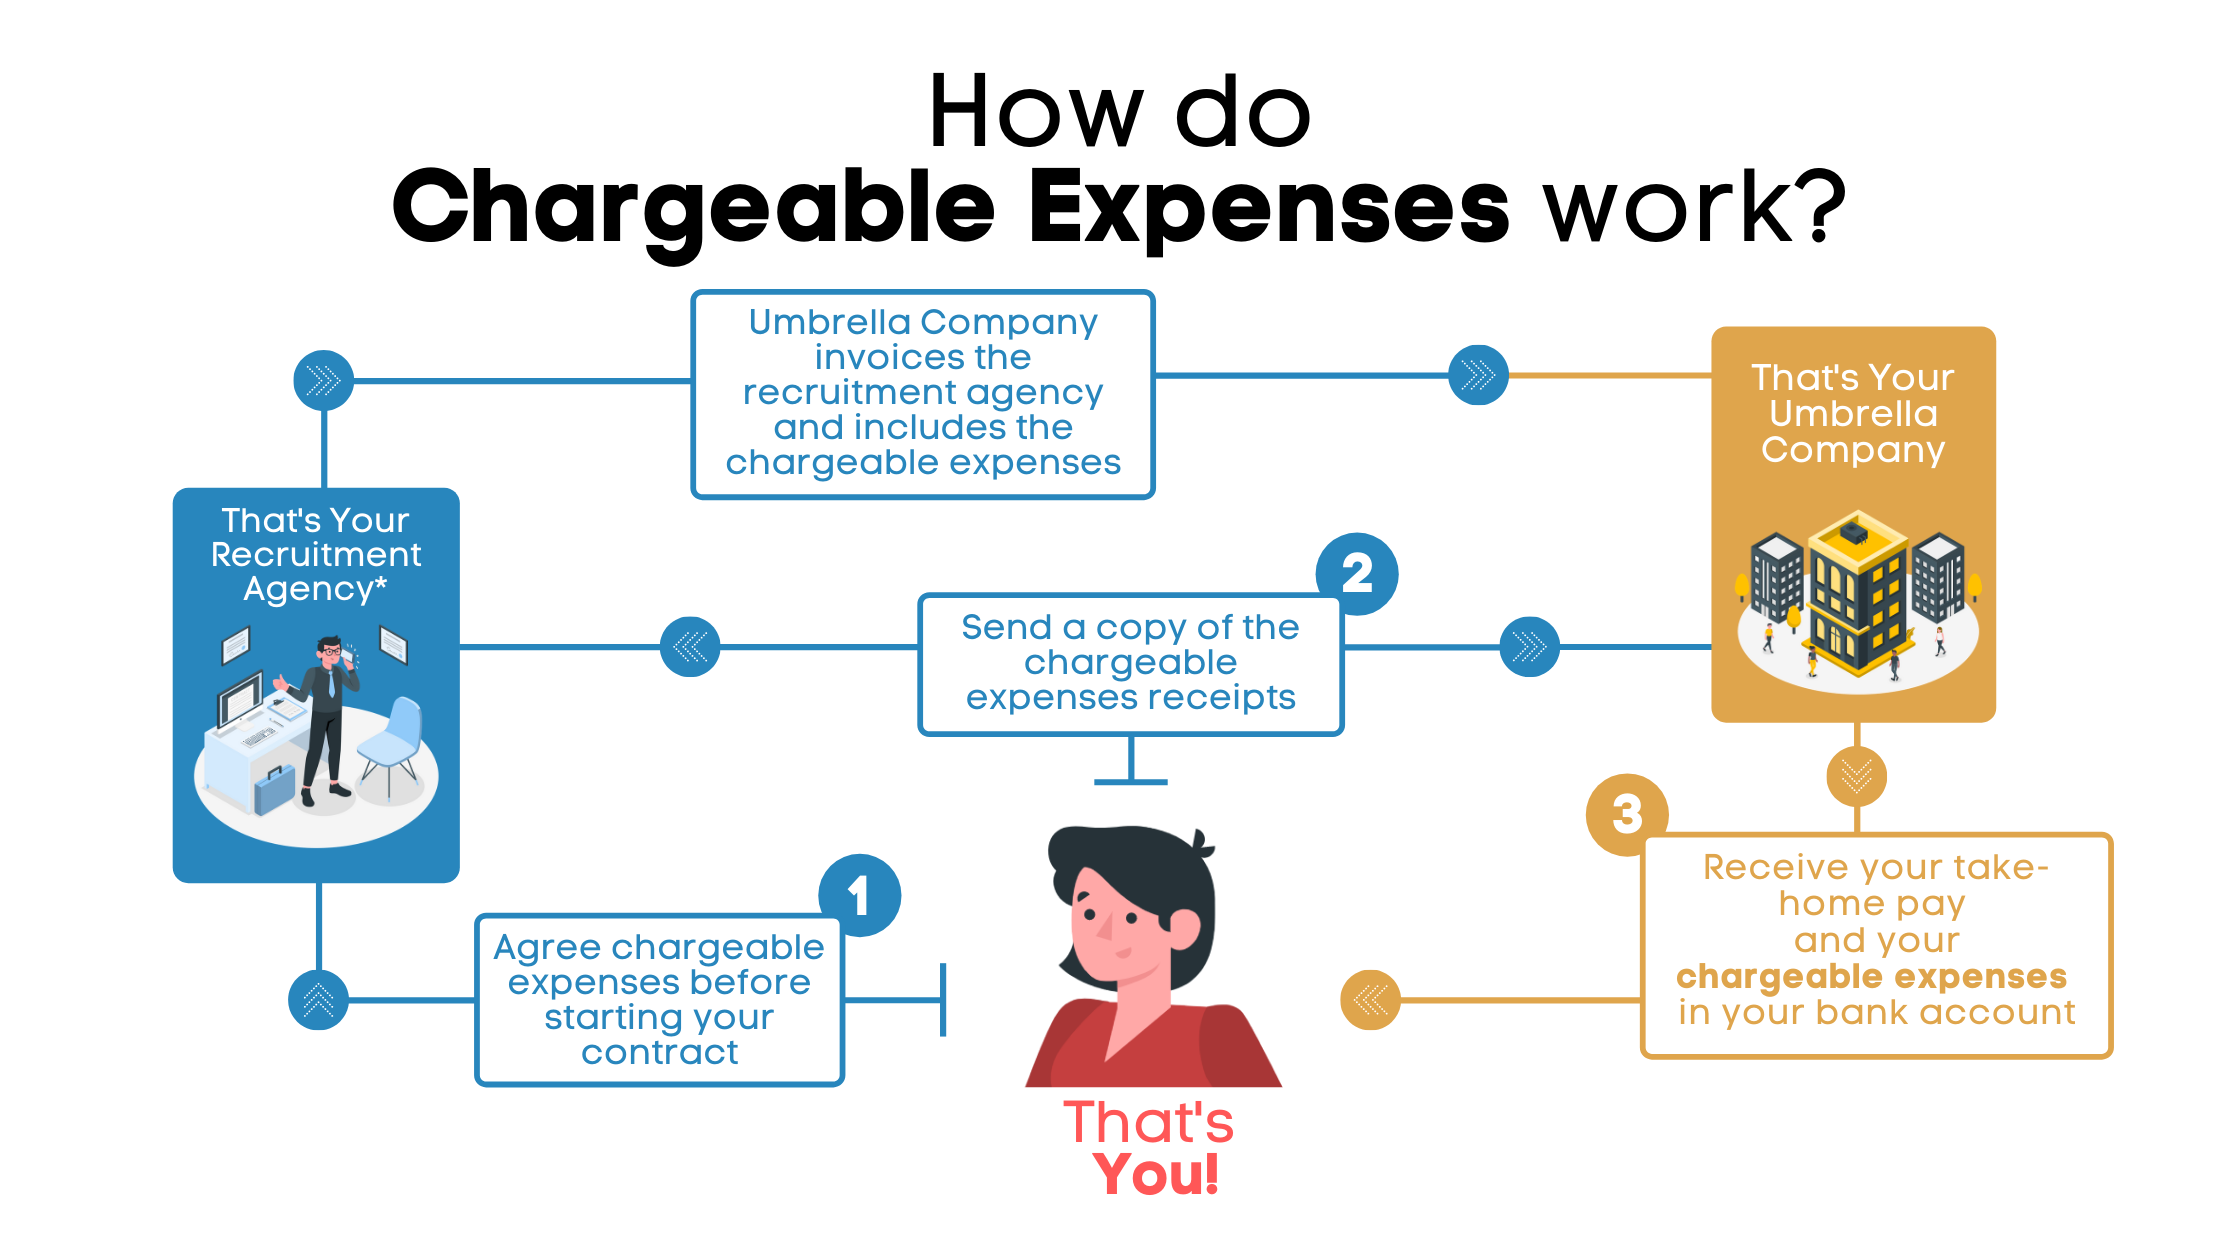 How do chargeable expenses work when working through an Umbrella Company?